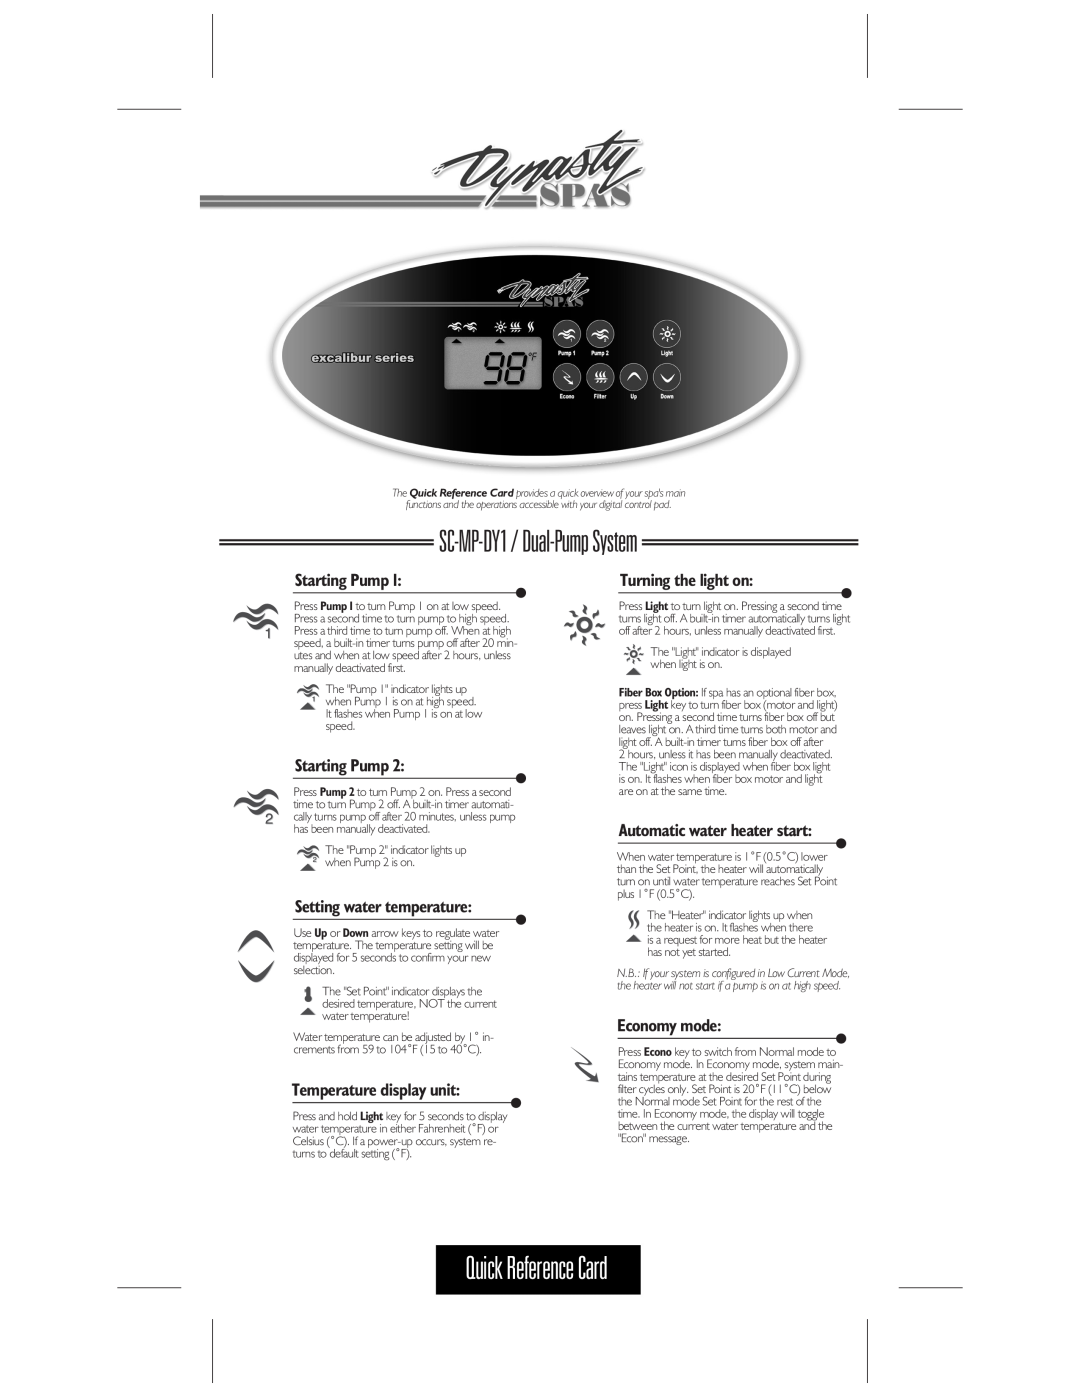 Dynasty Spas SC-MP-DY1 manual The Quick Reference Card provides a quick overview of your spas main, Starting Pump 